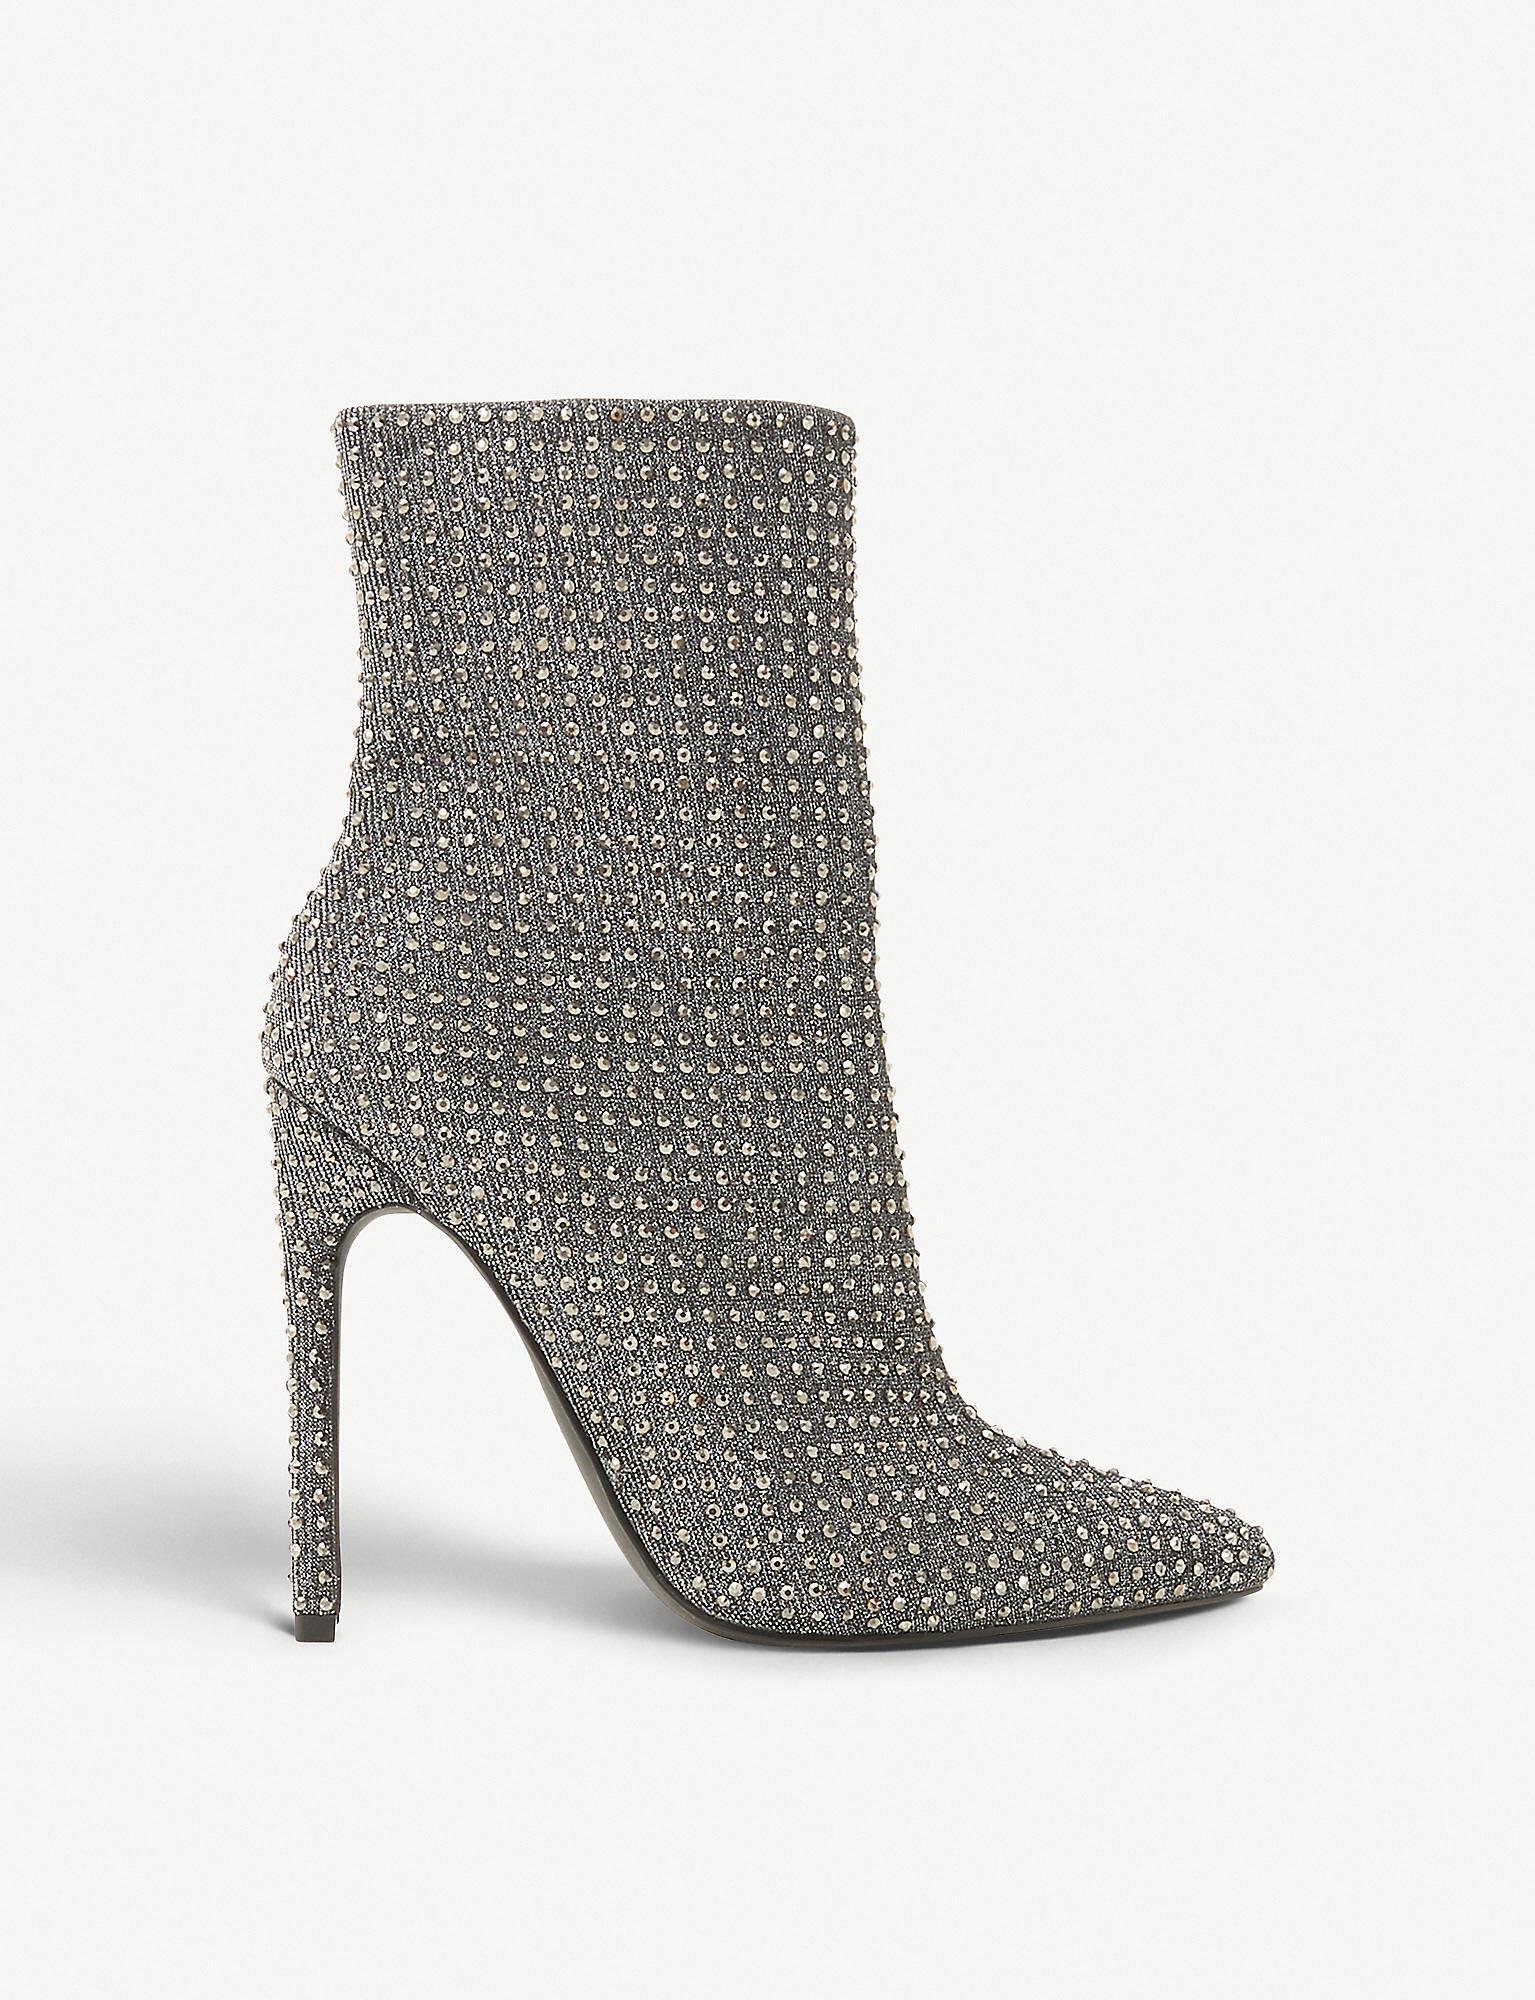 superficie Melodrama Inseguro Steve Madden Wifey Rhinestone-embellished Ankle Boots in Gray | Lyst